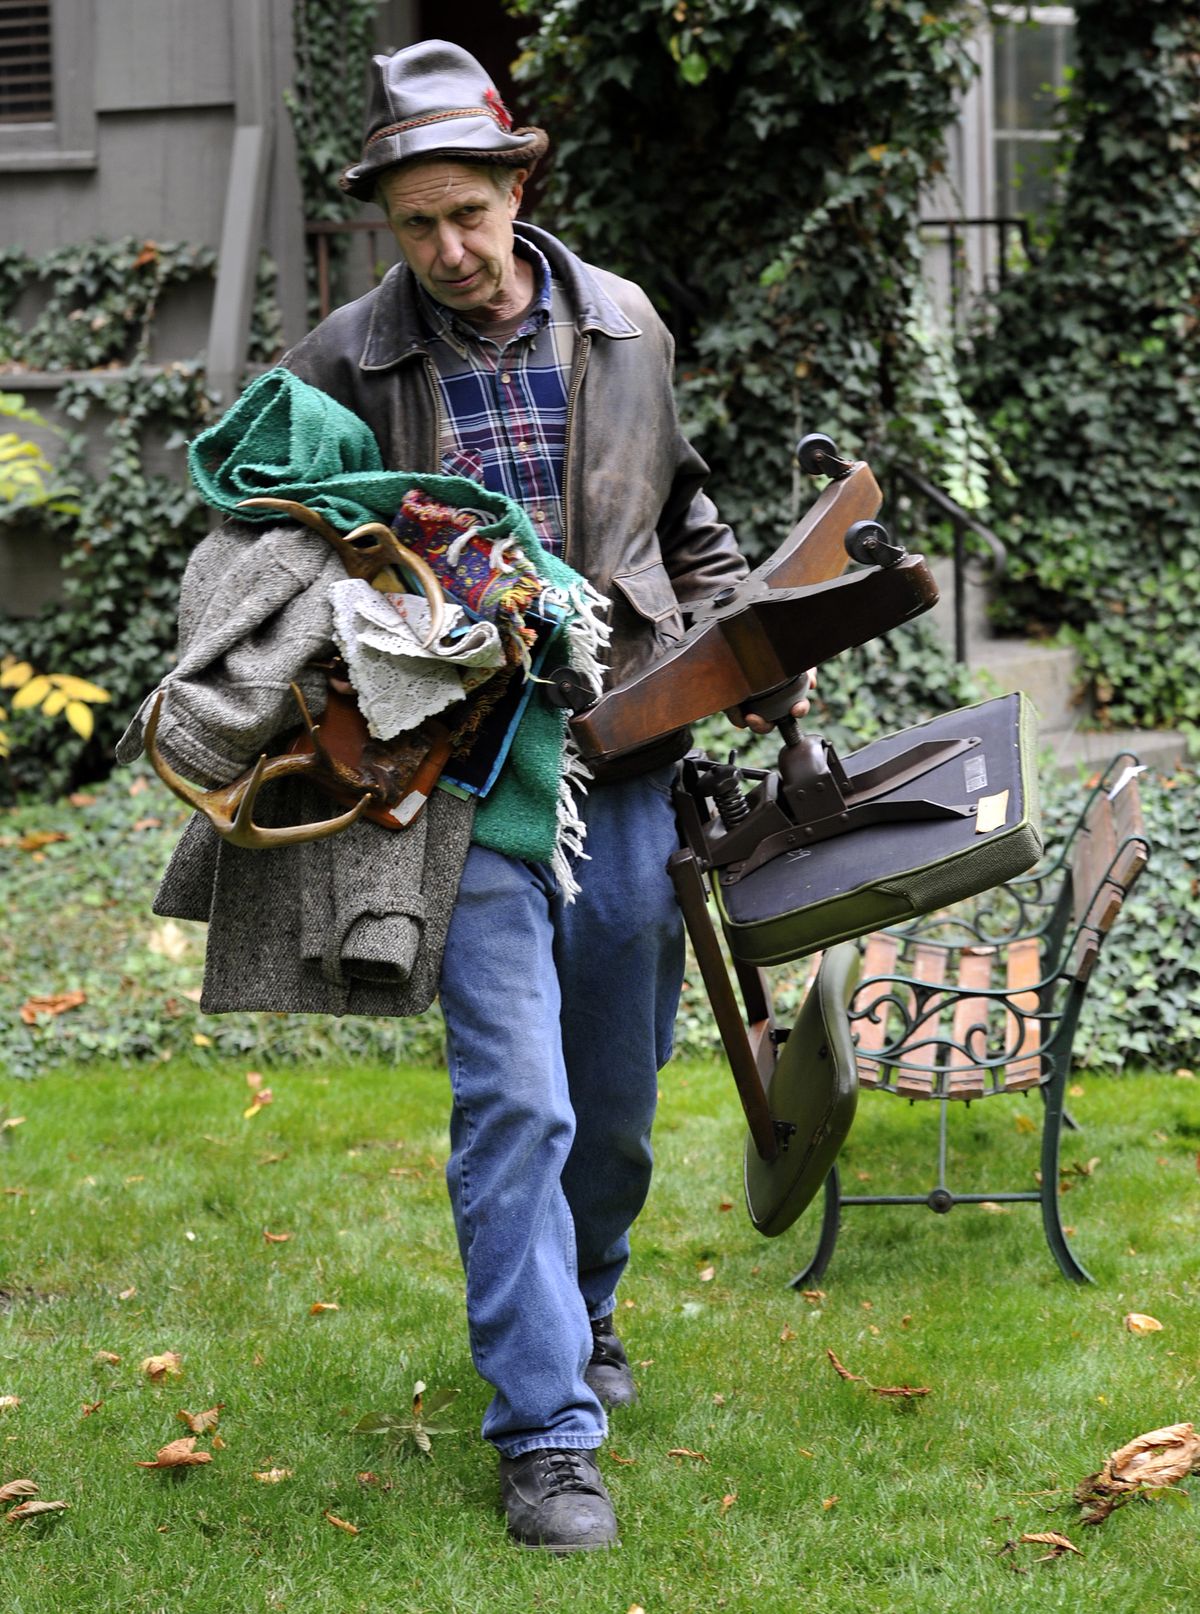 Dennis Held, owner of Area 58, gathers his finds – including a hat, clothing, blankets, office chair, antlers and a porch bench – at an estate sale on Friday in Millwood. (Dan Pelle)